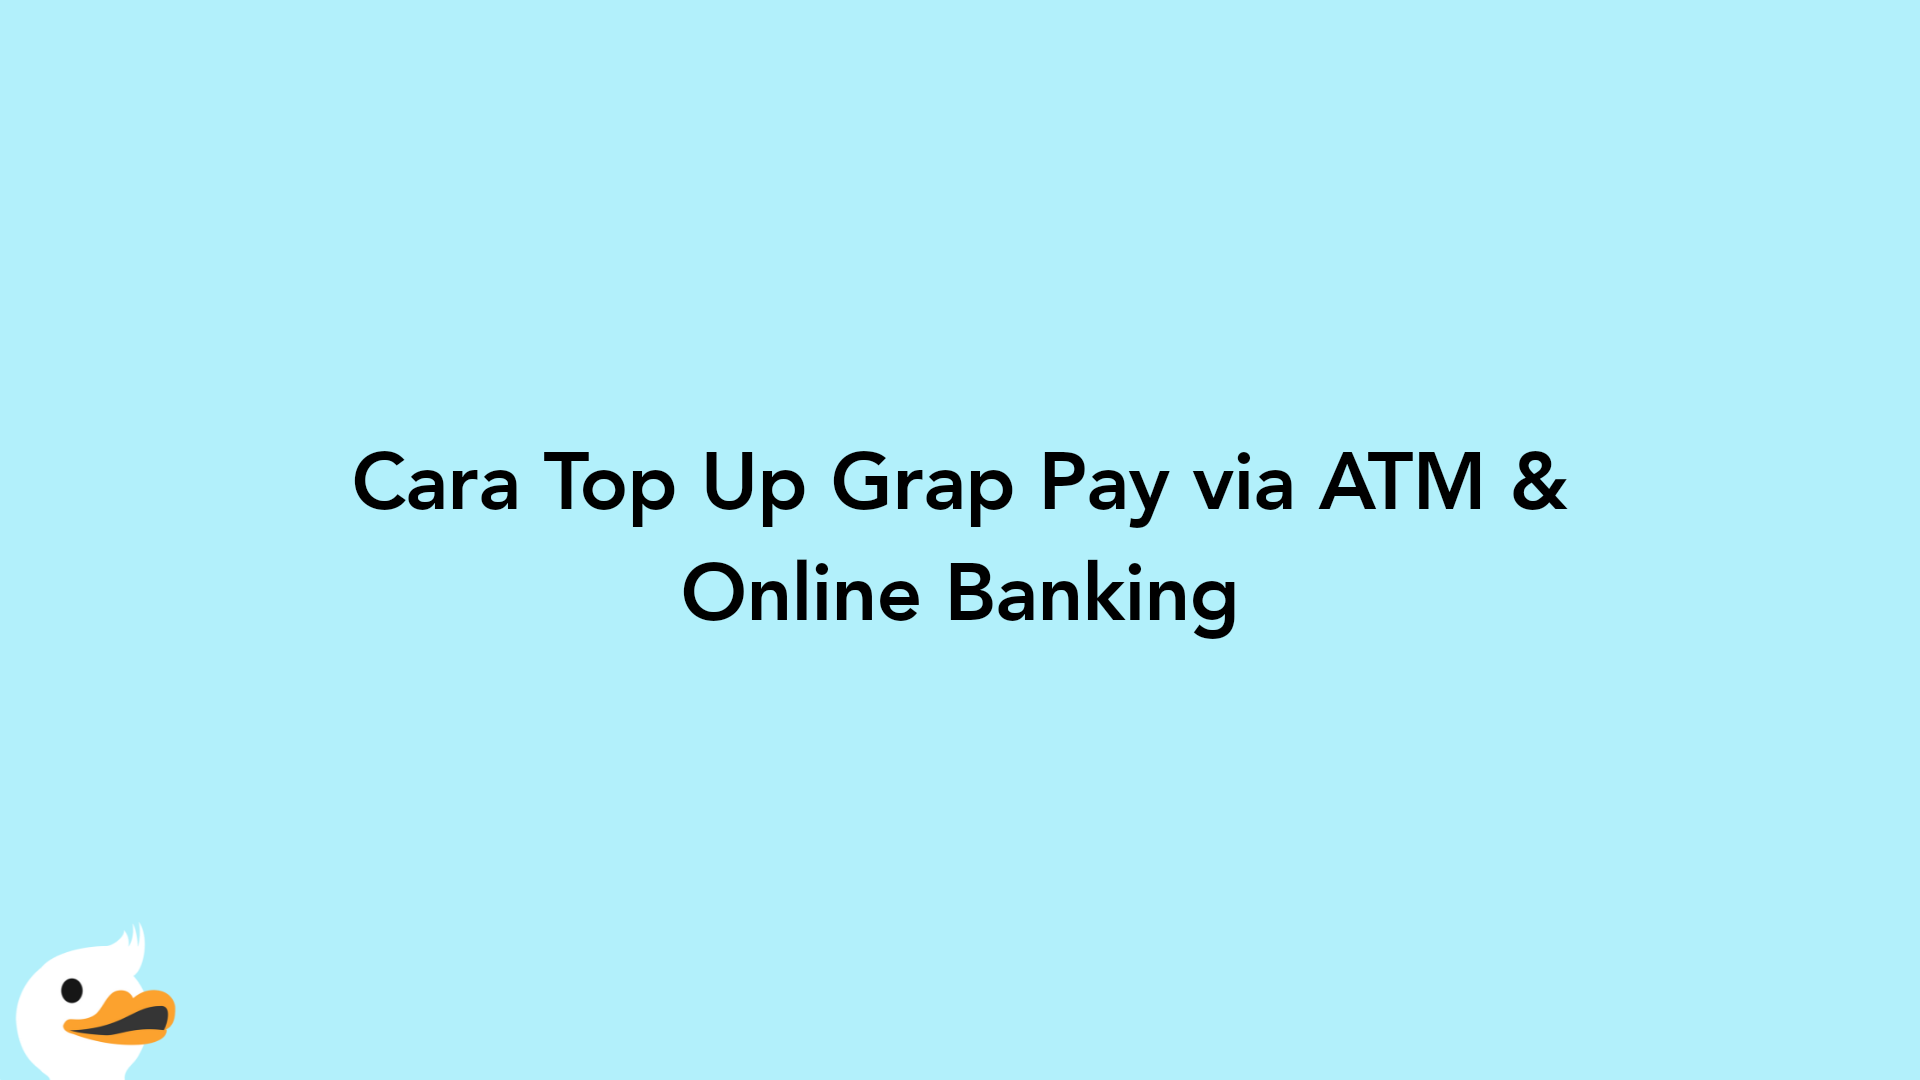 Cara Top Up Grap Pay via ATM & Online Banking